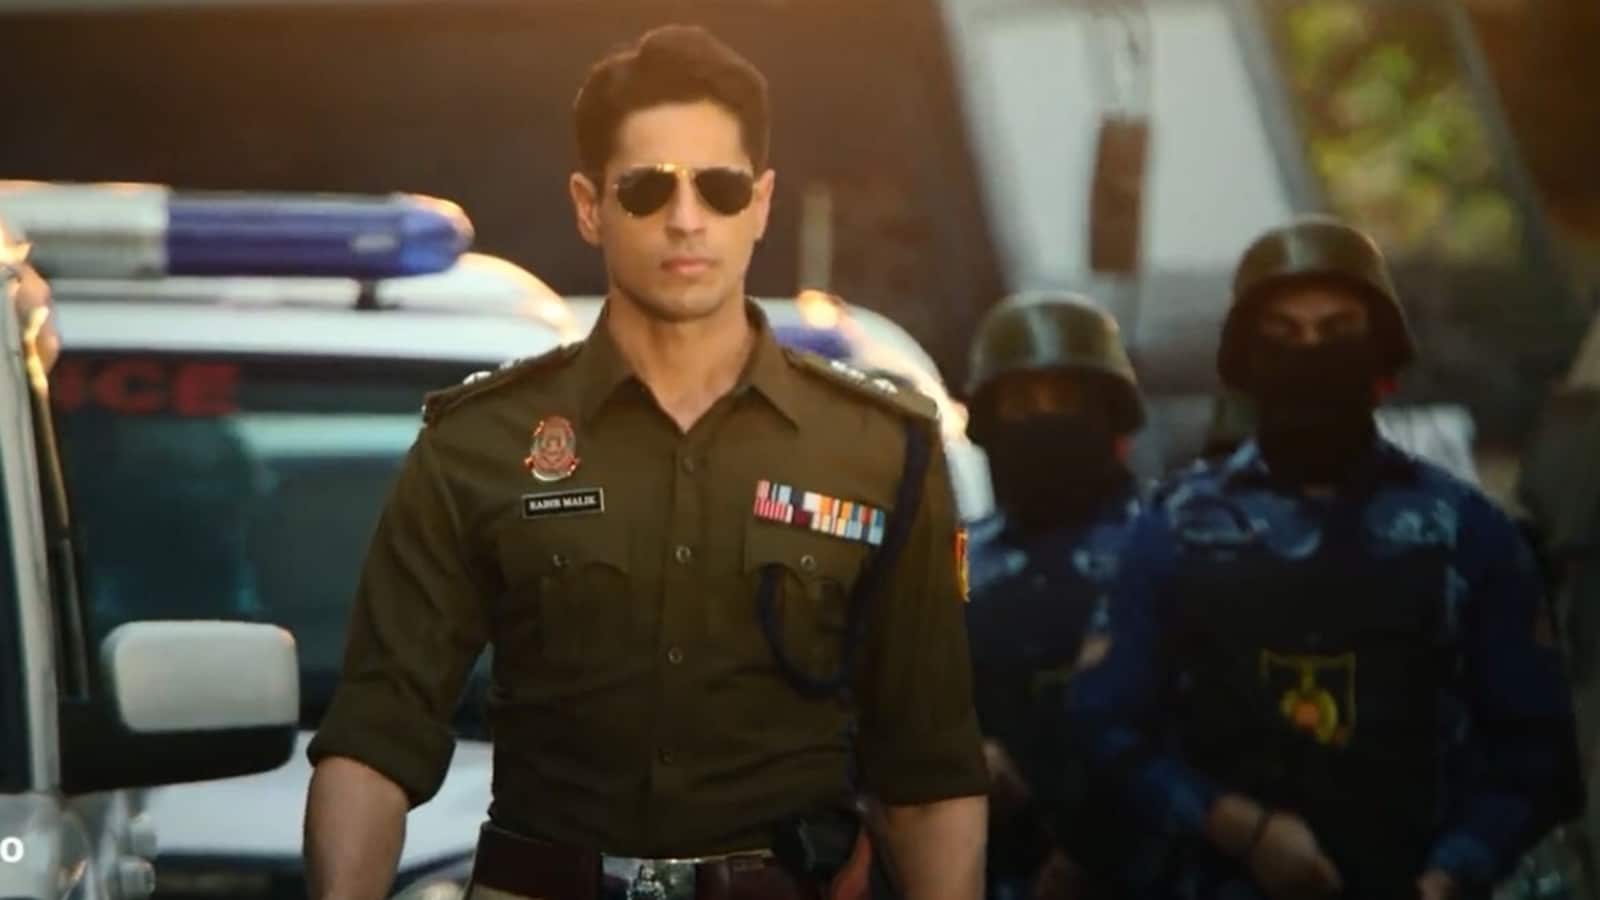 Indian Police Force teaser: Sidharth Malhotra joins Rohit Shetty's cop  universe | Bollywood - Hindustan Times